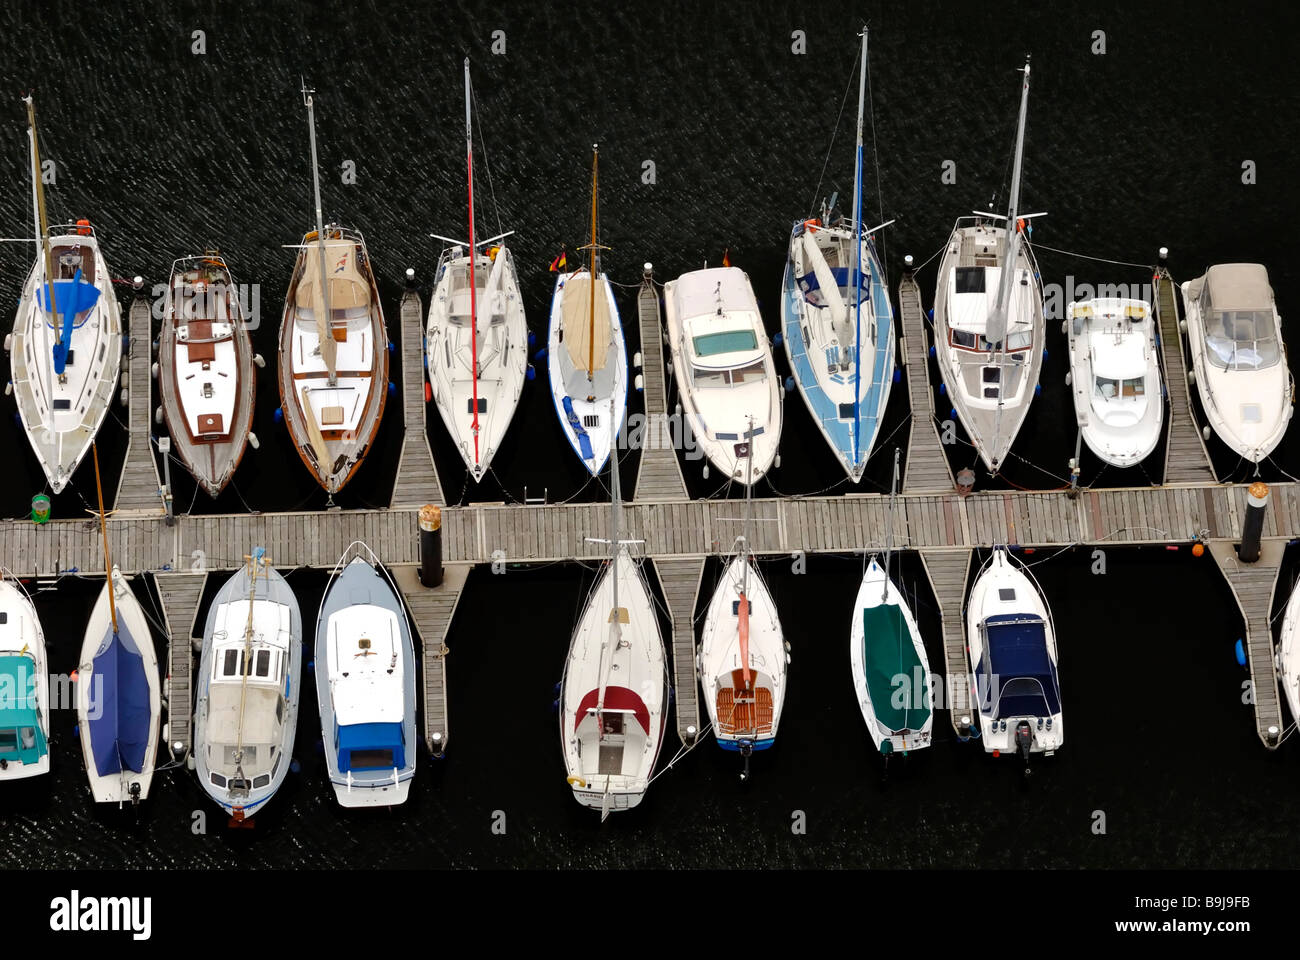 Sailing boats in the marina from a bird's eye view, Kiel-Schilksee, Schleswig-Holstein, Germany, Europe Stock Photo